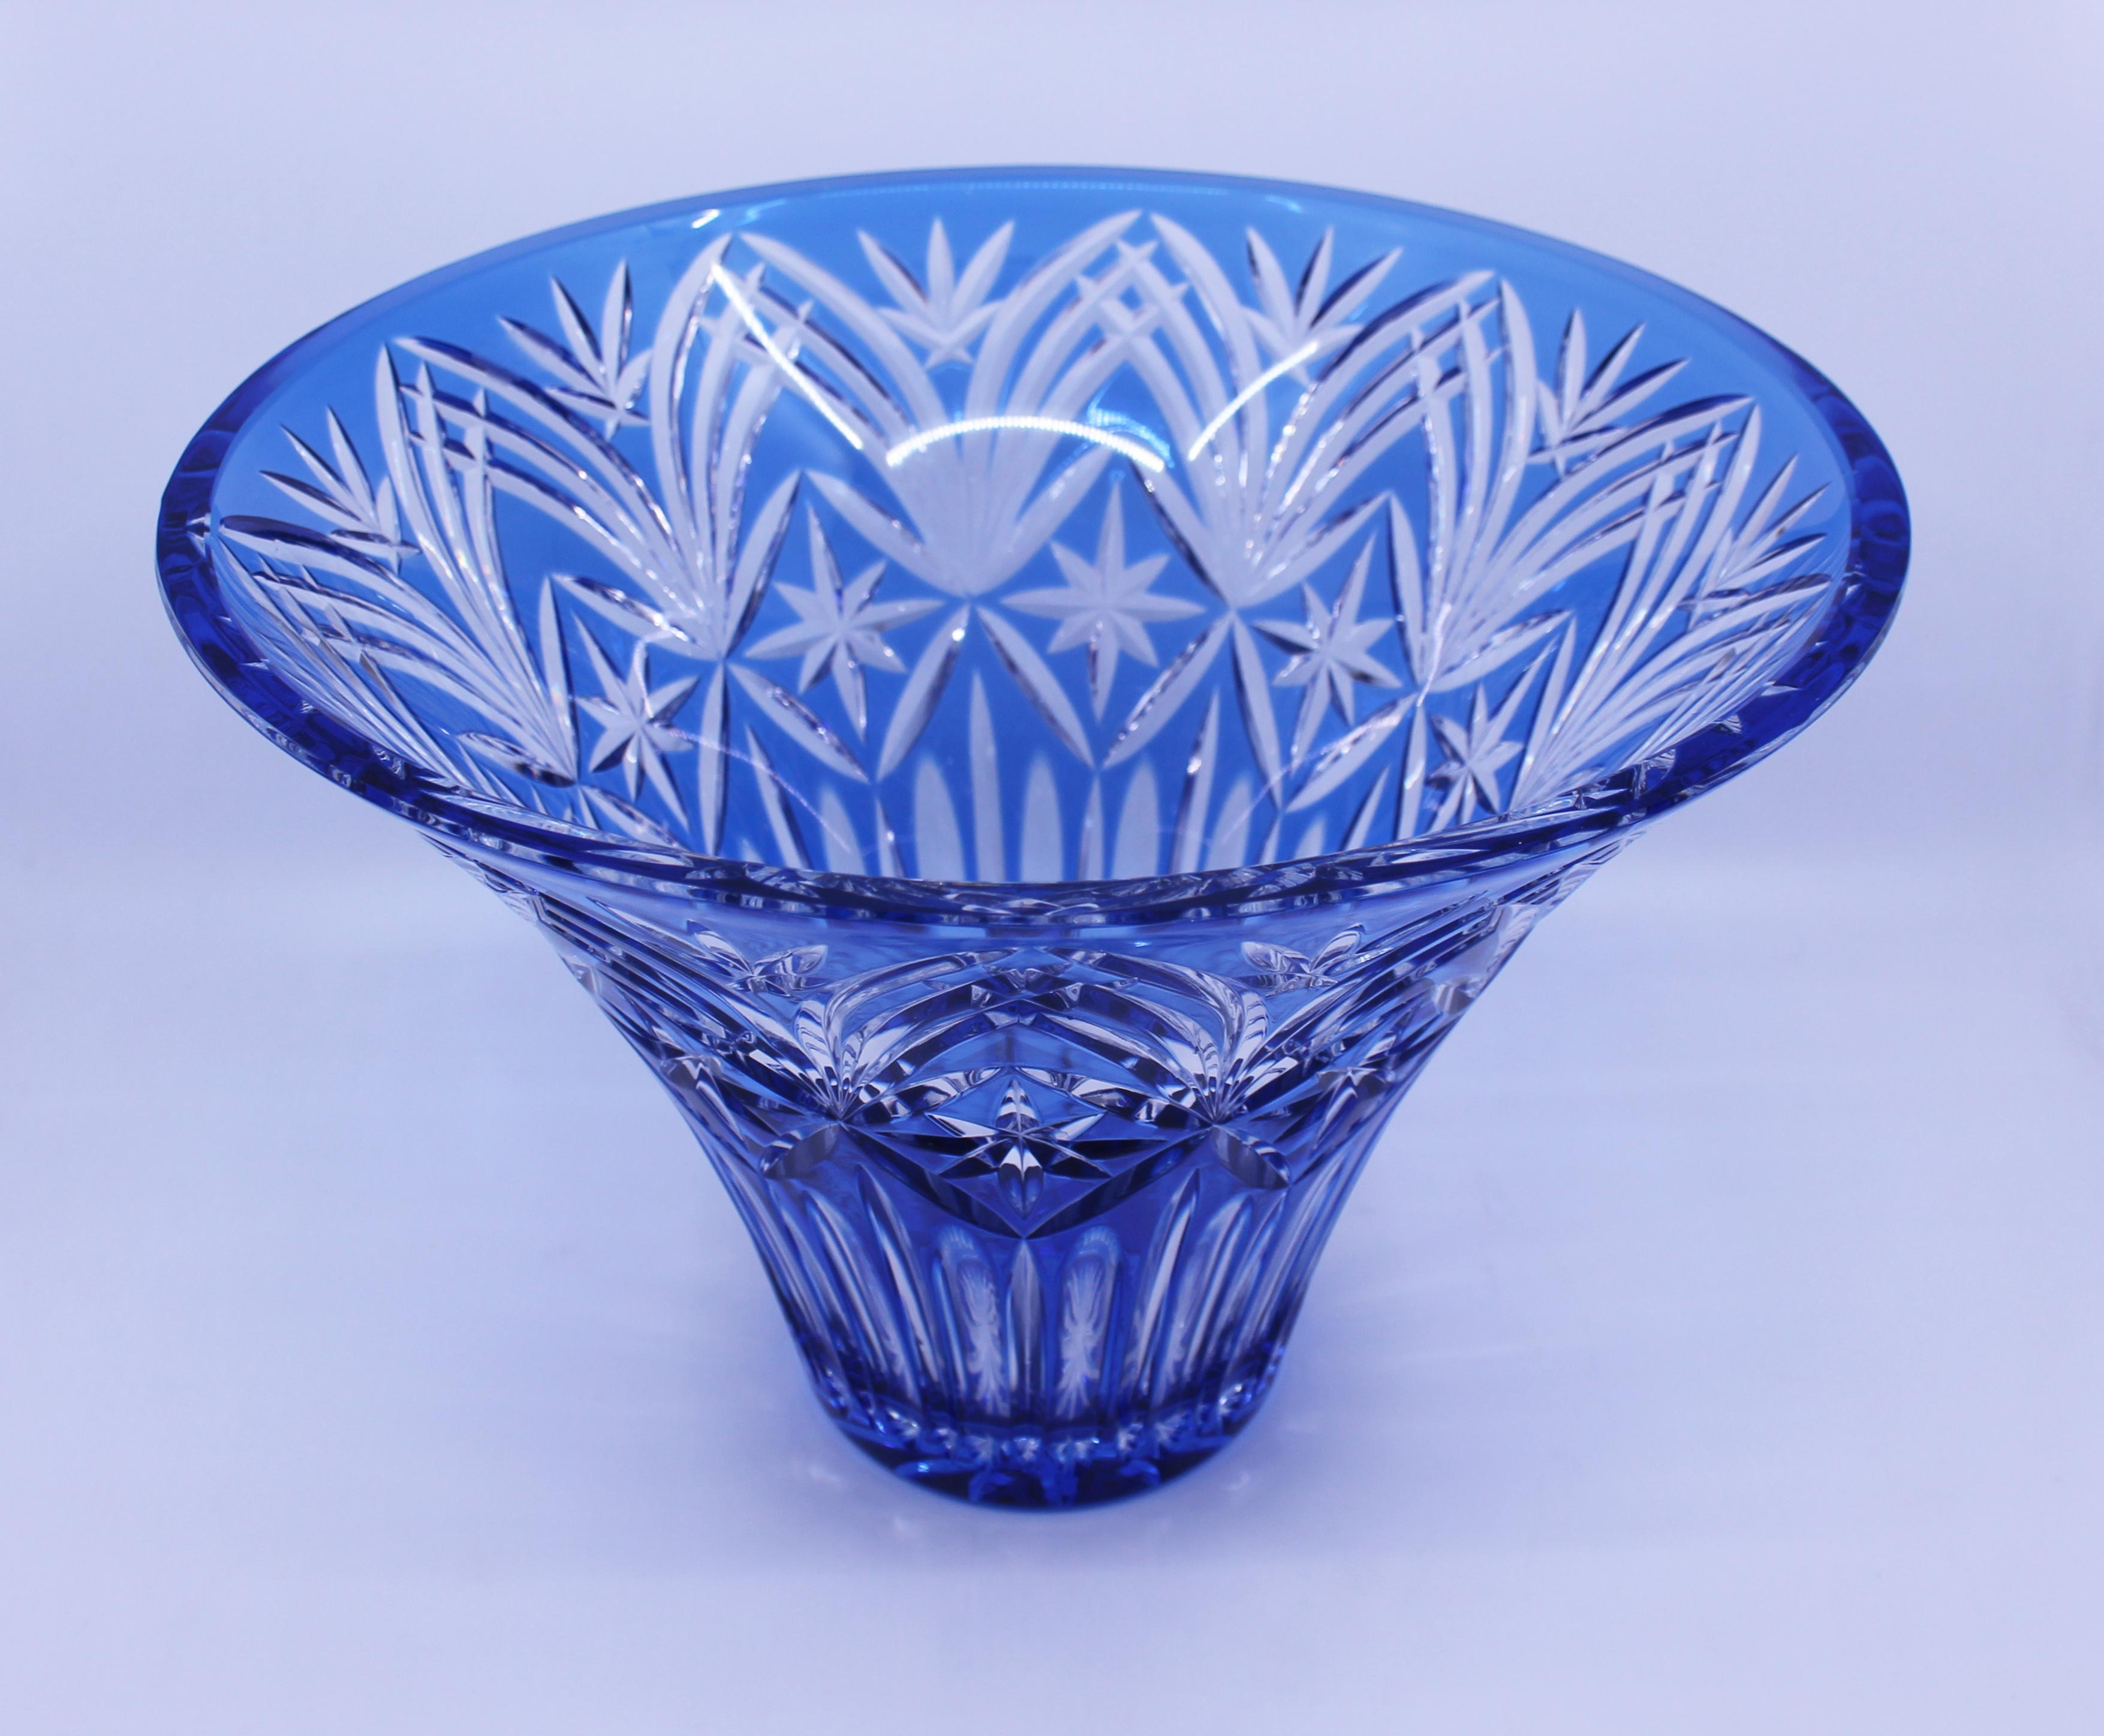 Period 
Mid-late 20th century.

Origin 
Stourbridge, England

Composition 
Cut glass overlay crystal, blue

Condition 
Very good condition. No chips, cracks or repairs. Light scratches to underside commensurate with age
 

 

Vintage